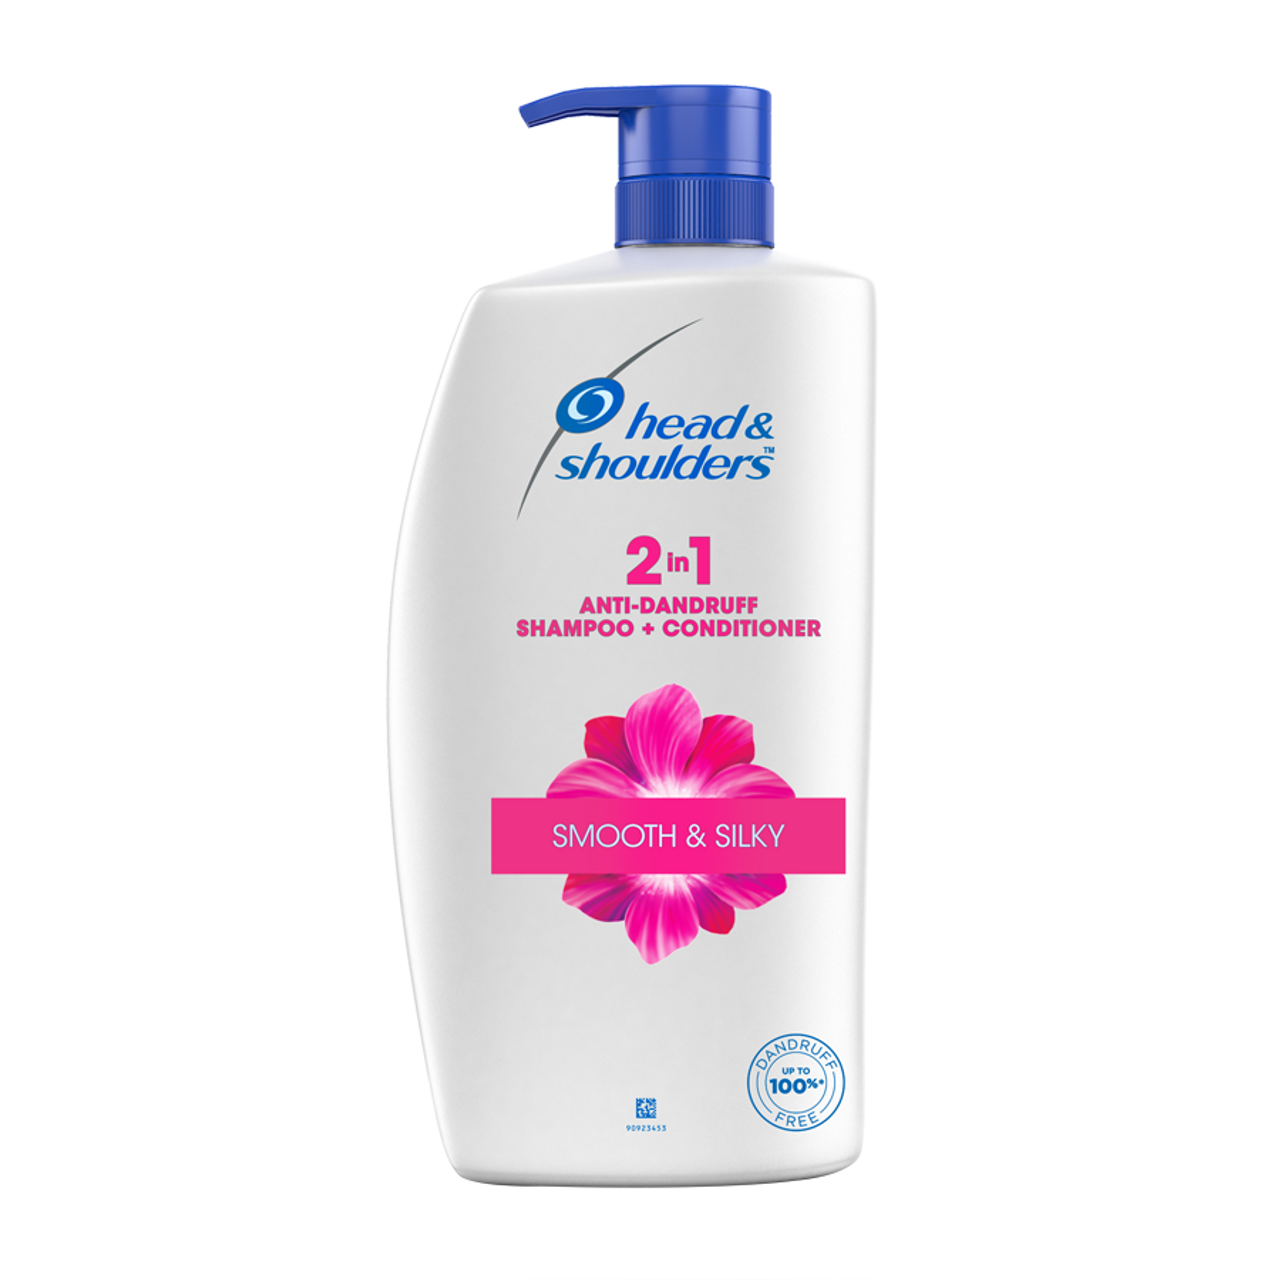 Head & Shoulders 2-in-1 Smooth and Silky 1 ltr Bottle